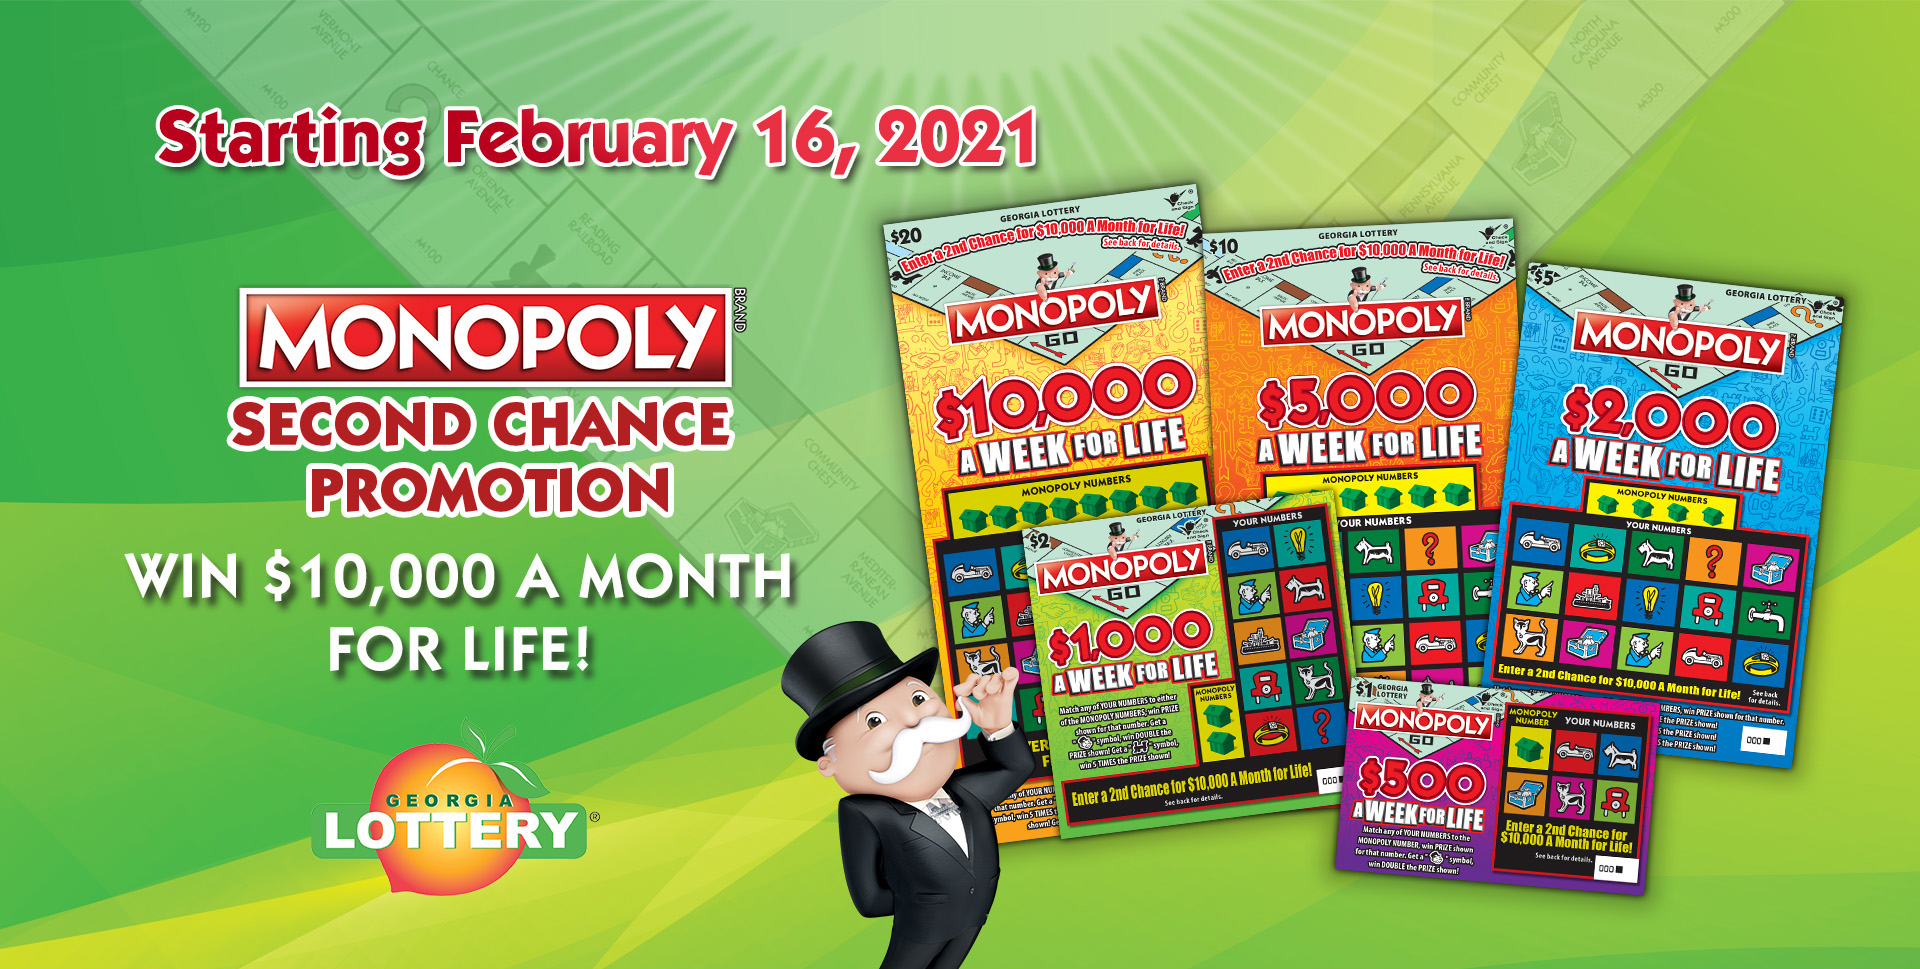 Georgia Lottery. MONOPOLY Second Chance Promotion. Starting February 16, 2021. WIN $10,000 A MONTH FOR LIFE!